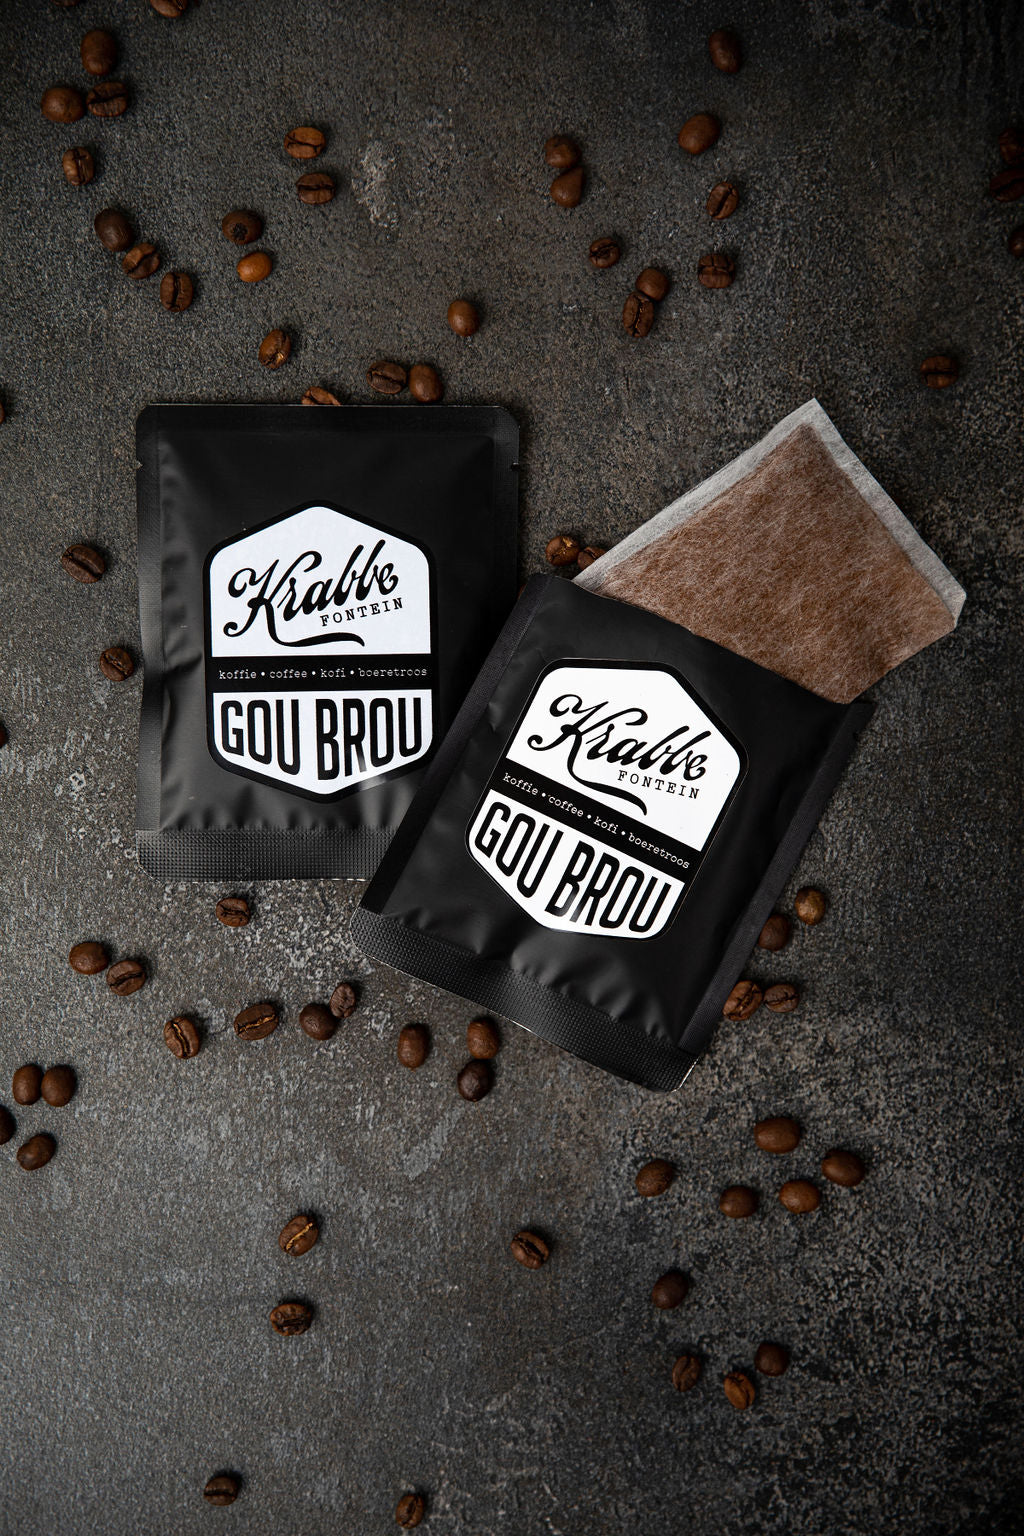 Krabbefontein Gou Brou Coffee Sachets. Best Coffee in South Africa. Ideal for outdoors, camping or anywhere!